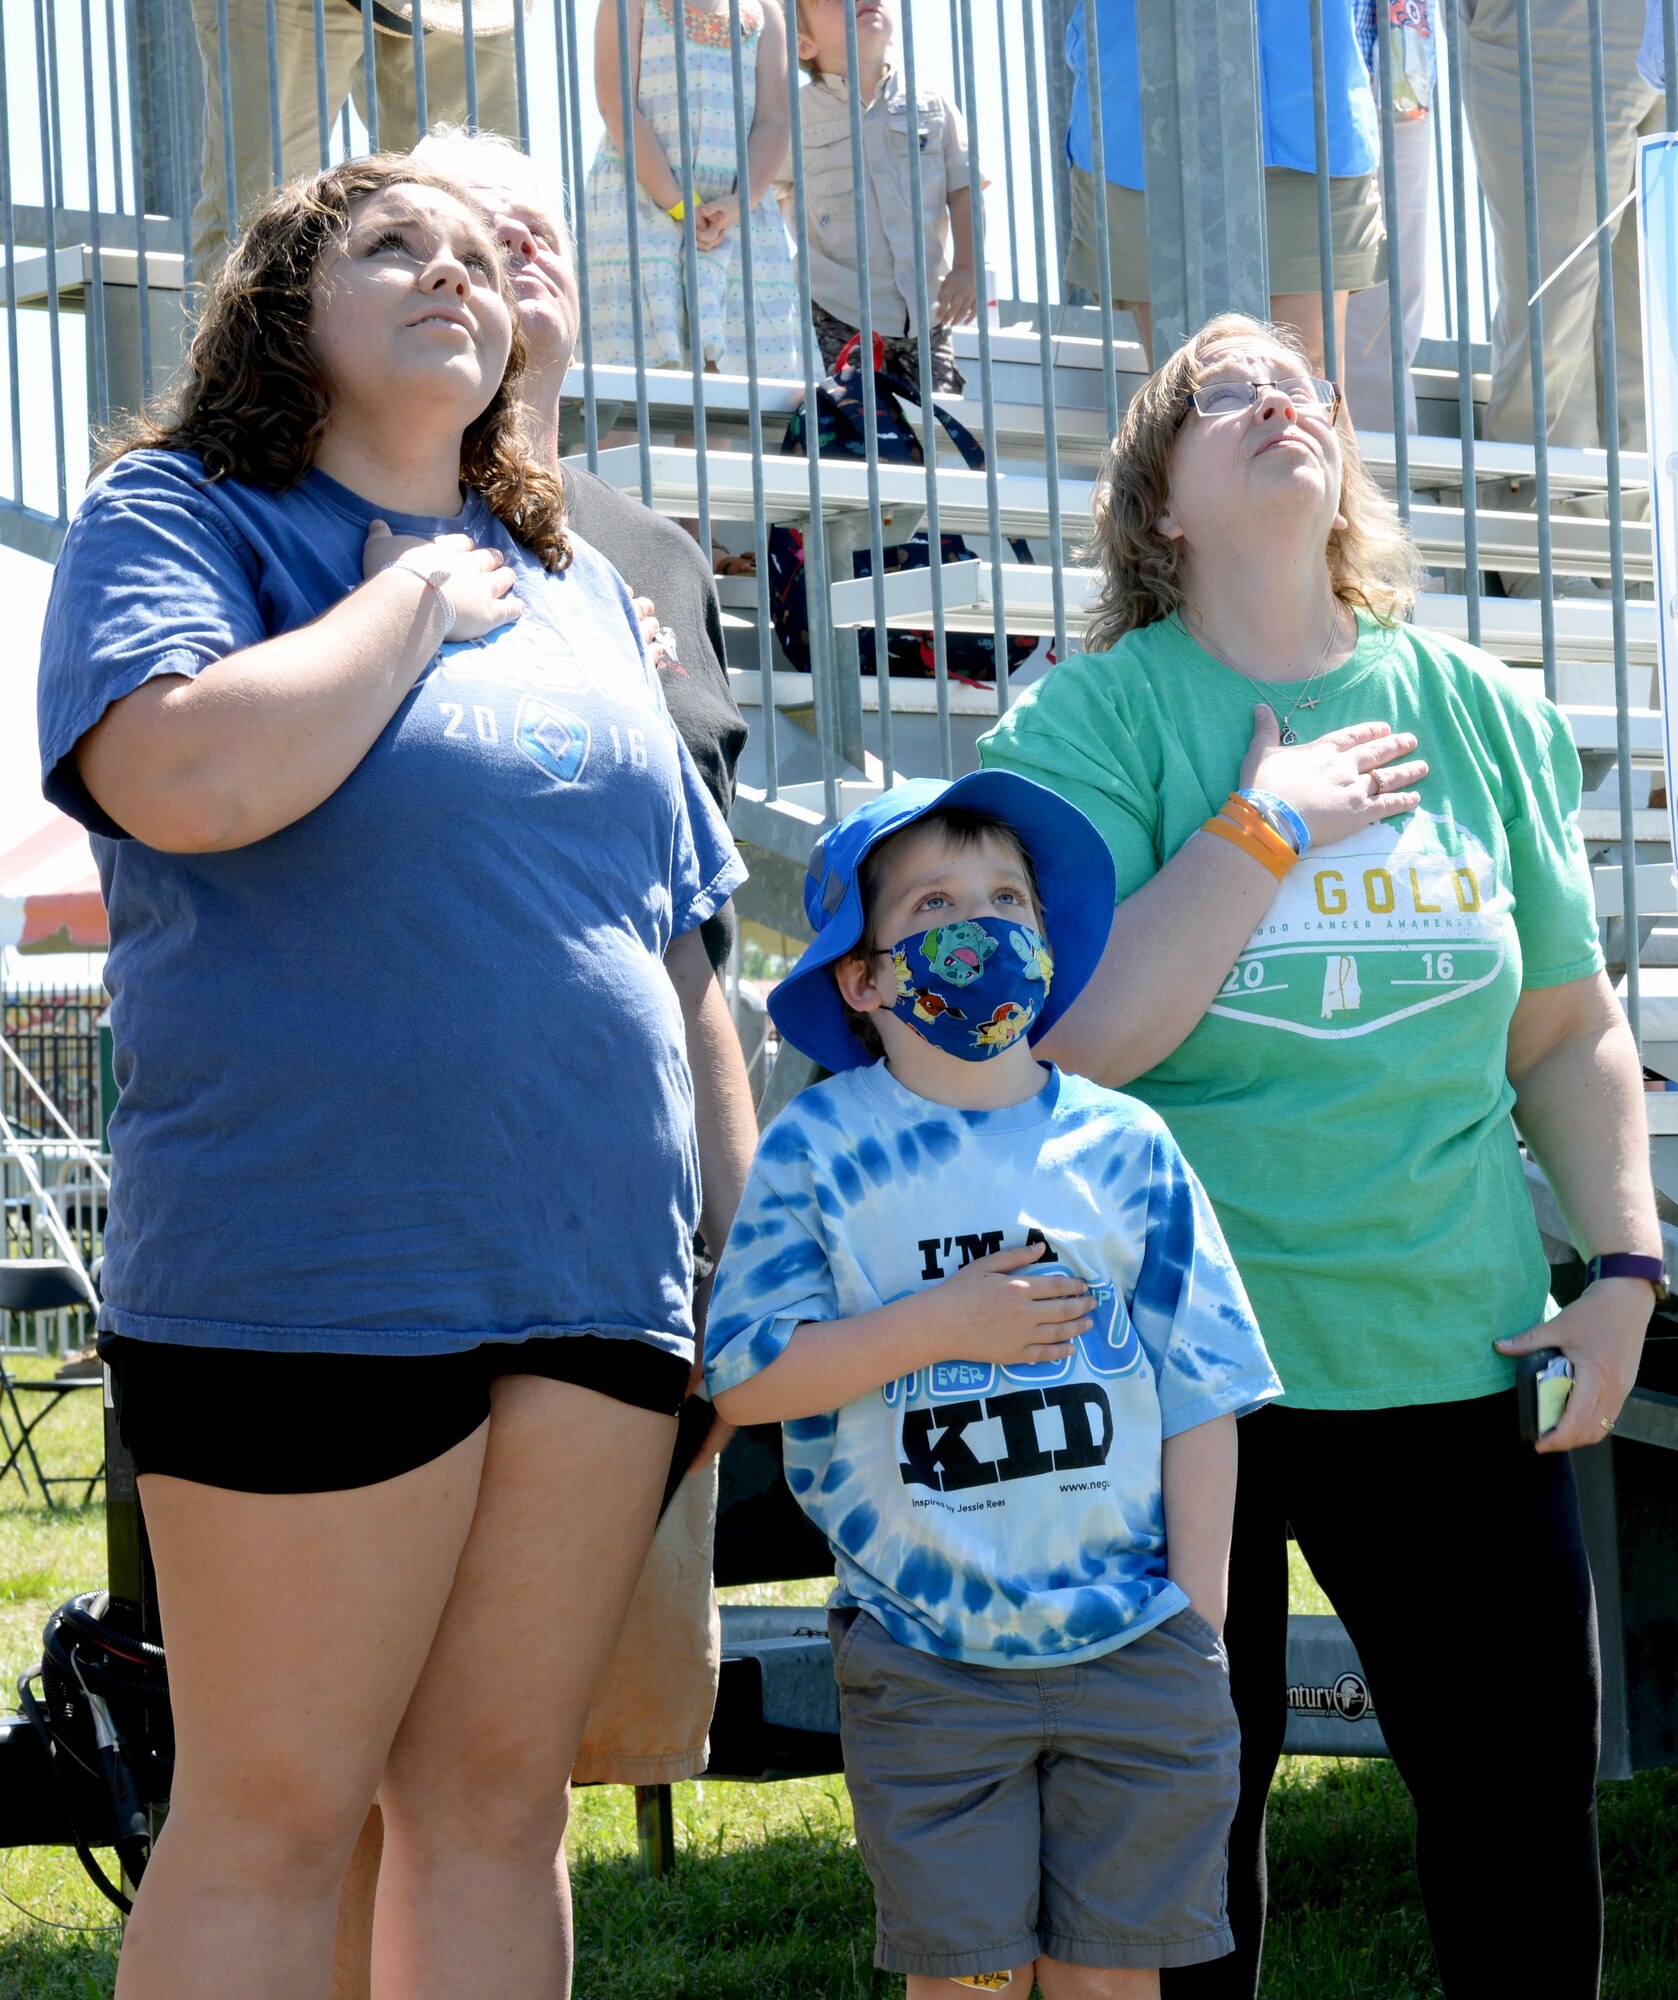 T.J. Esco, middle, and his family watch Air Force members parachute from an airplane during the Maxwell Air Show, April 9, 2017. Since being diagnosed with Acute Lymphoblastic Leukemia, T.J. would pretend to be a pilot and fly airplanes with his father during multiple hospital stays. (U.S. Air Force photo/Senior Airman Tammie Ramsouer)